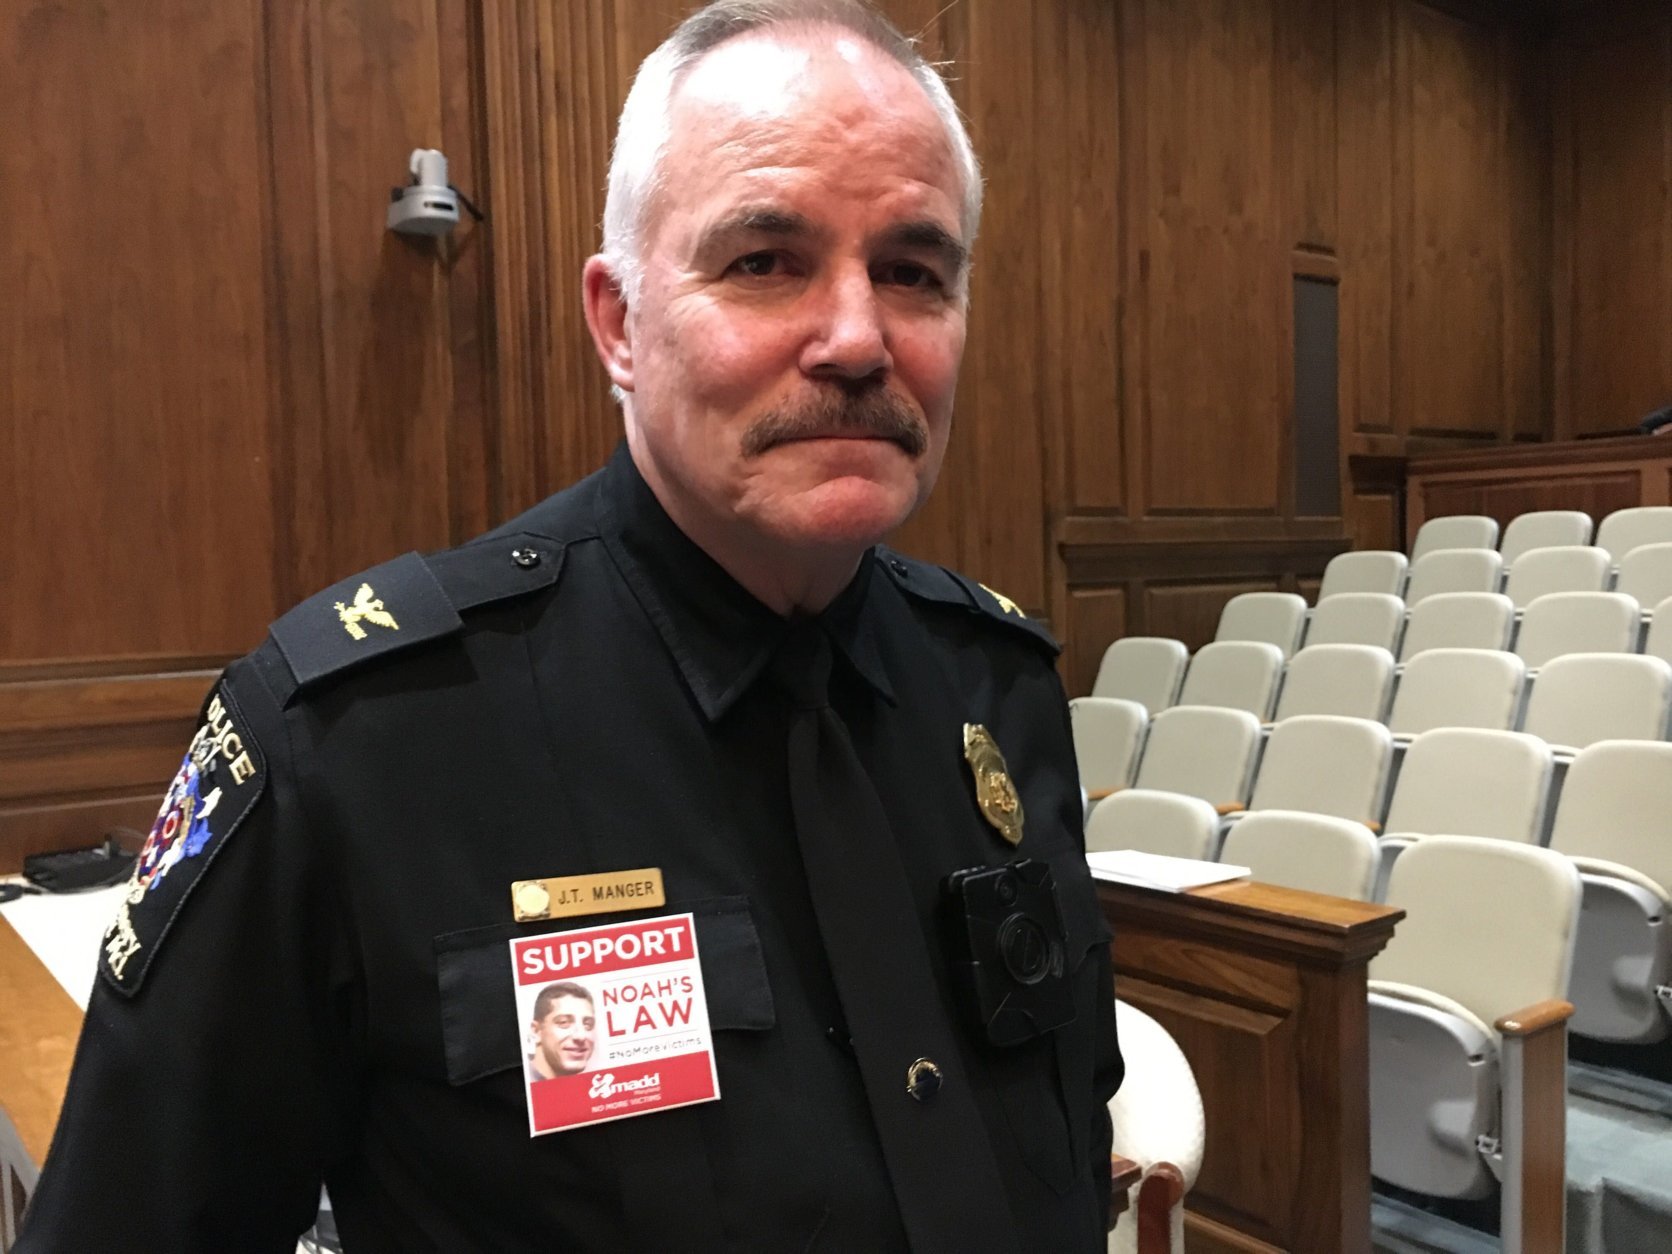 Police Chief Tom Manger in Annapolis where he joined Leotta’s parents in testifying in favor of “Noah’s Law” designed to toughen penalties for drunk driving. The bill ended up passing. (WTOP/Kate Ryan)